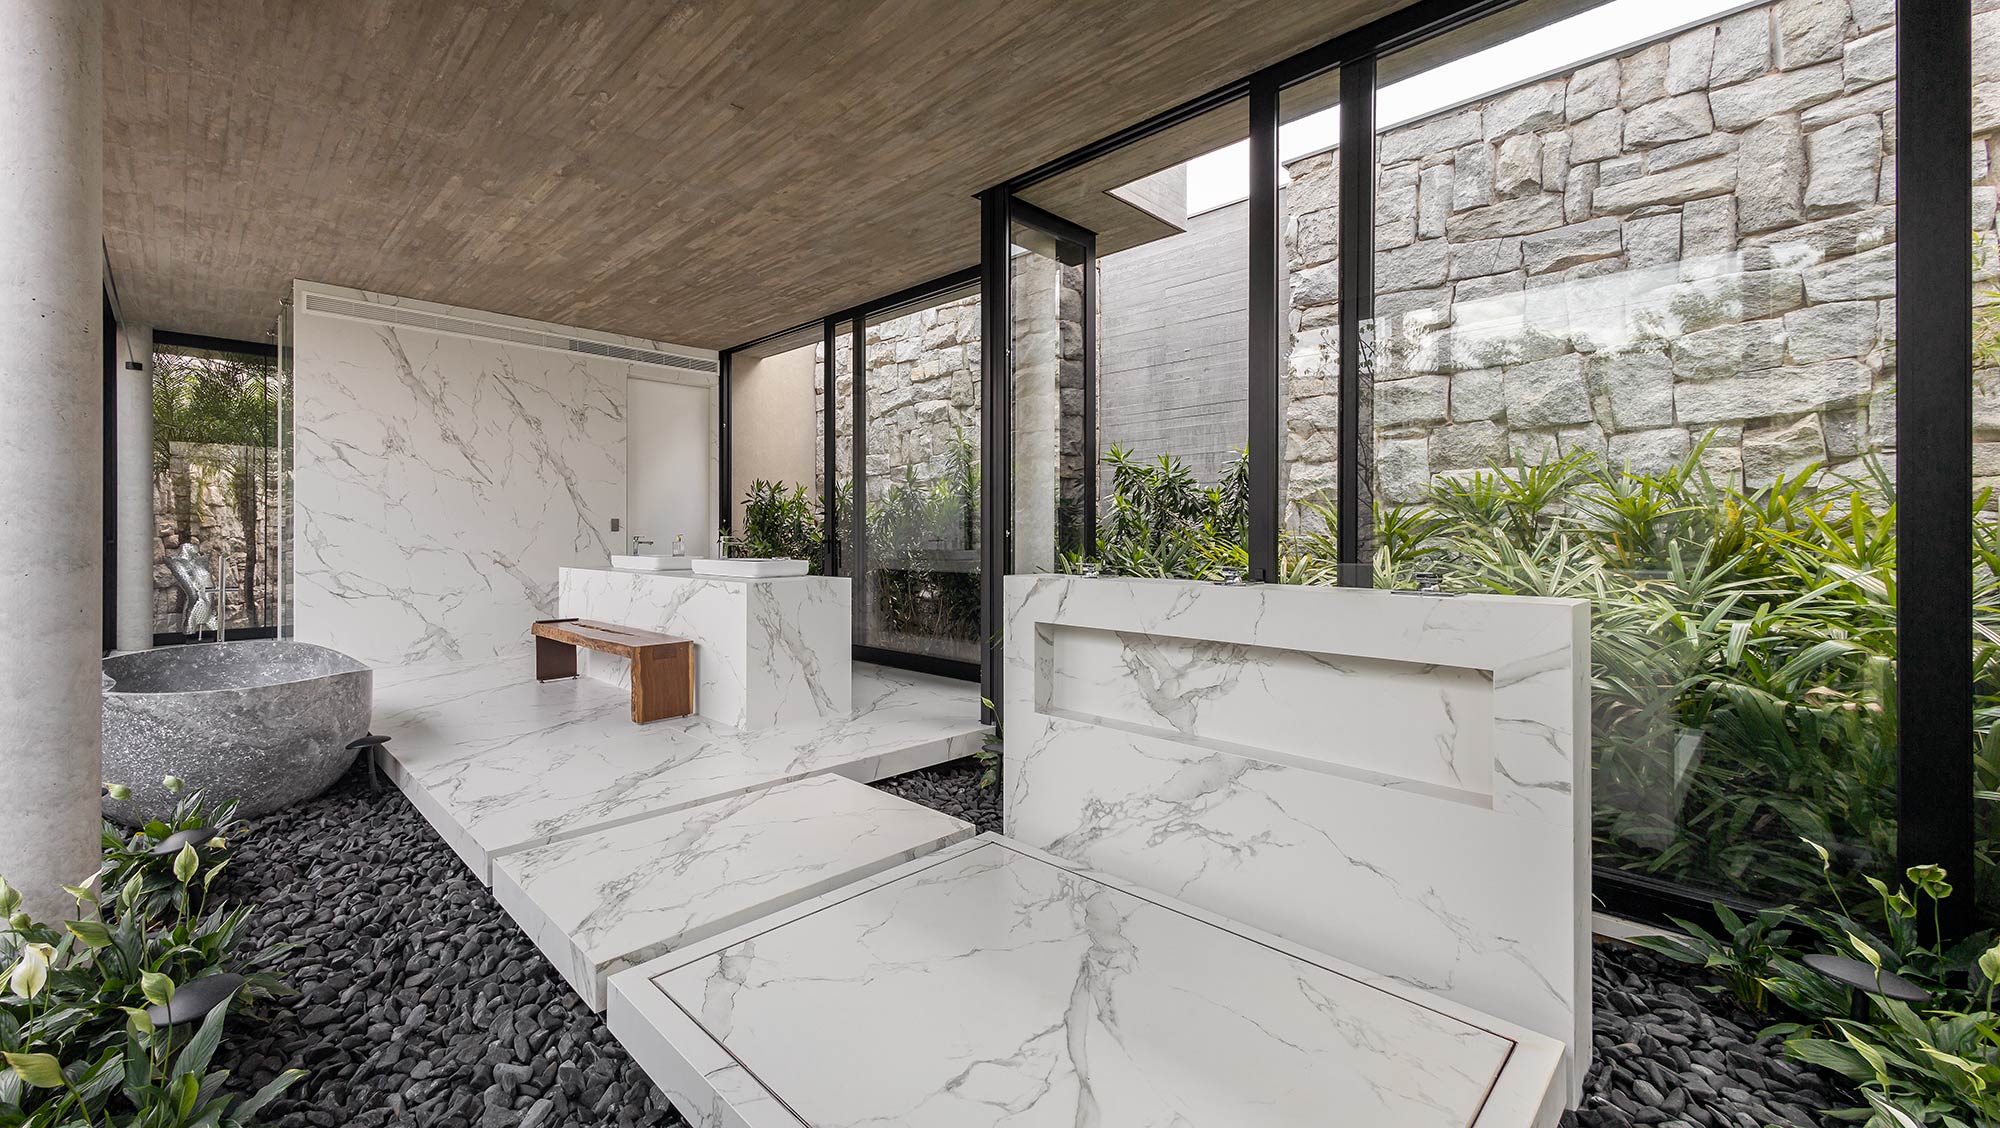 Image of Casa Hectares Dourados 19 in From the bathrooms to the barbecue area: This family loved Cosentino so much that they used it in all the spaces they renovated - Cosentino